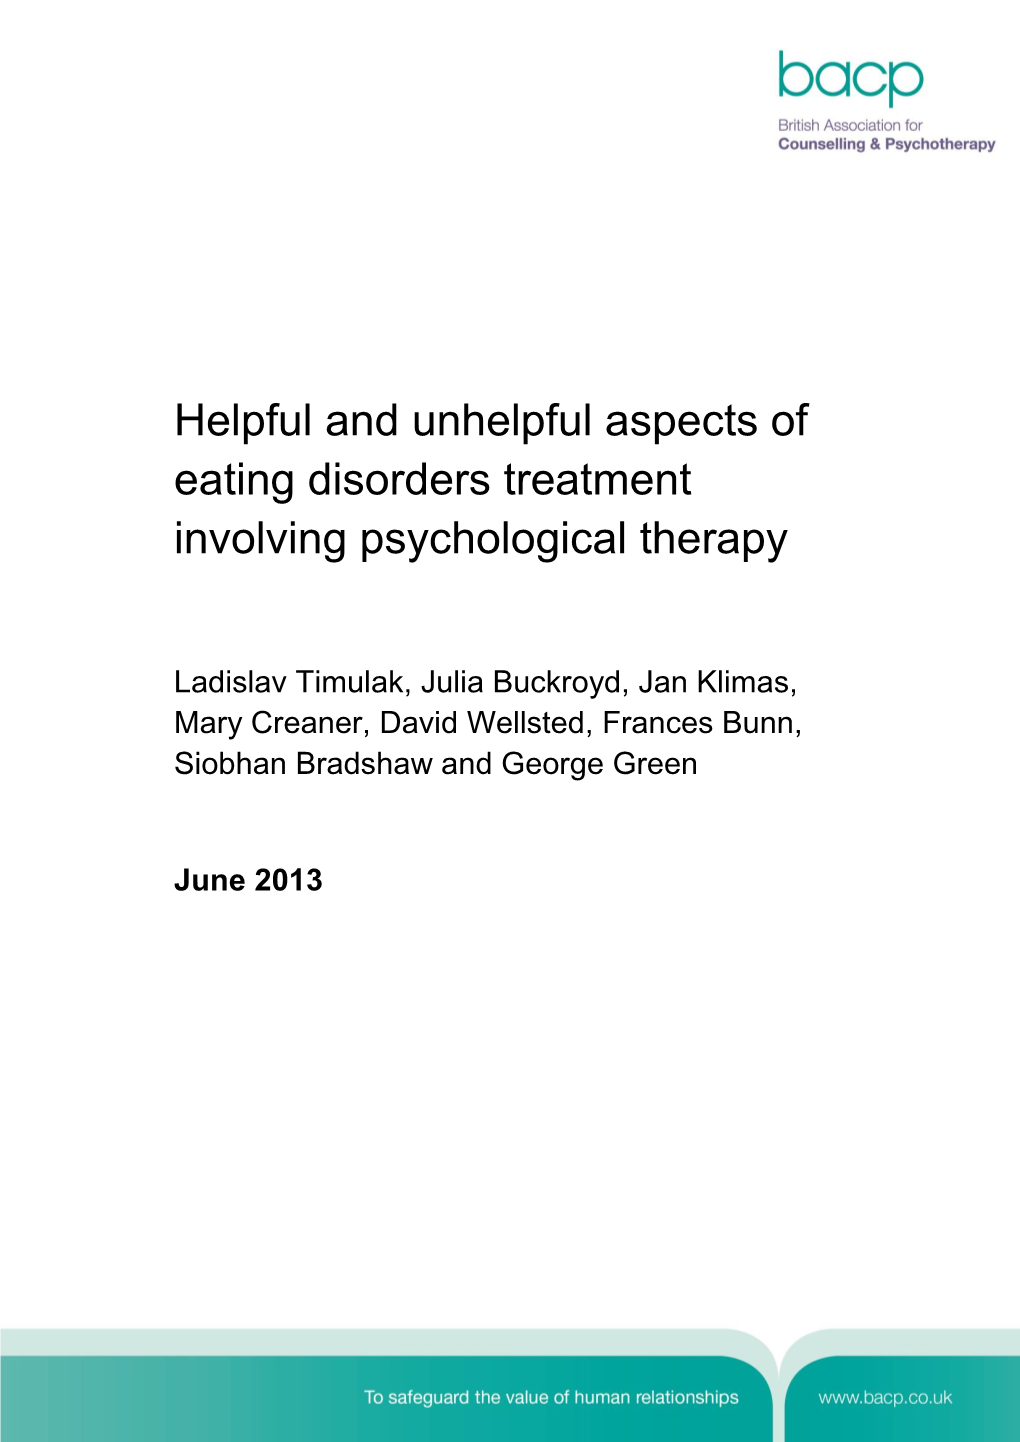 Helpful and Unhelpful Aspects of Eating Disorders Treatment Involving Psychological Therapy